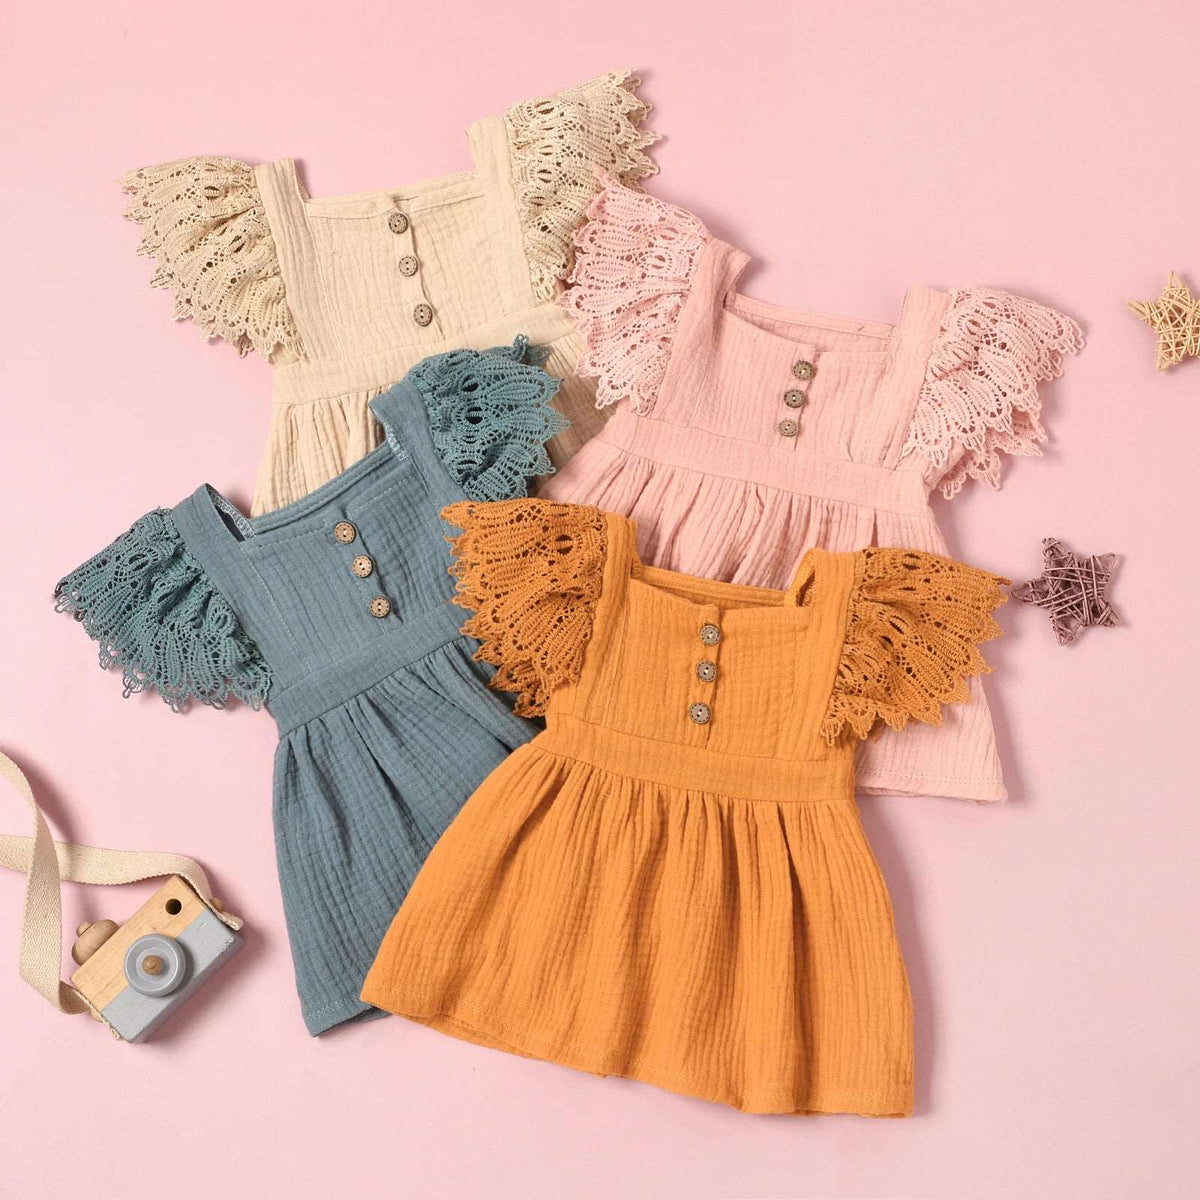 Adorable Baby Dress: Cute and Comfortable for Every Occasion